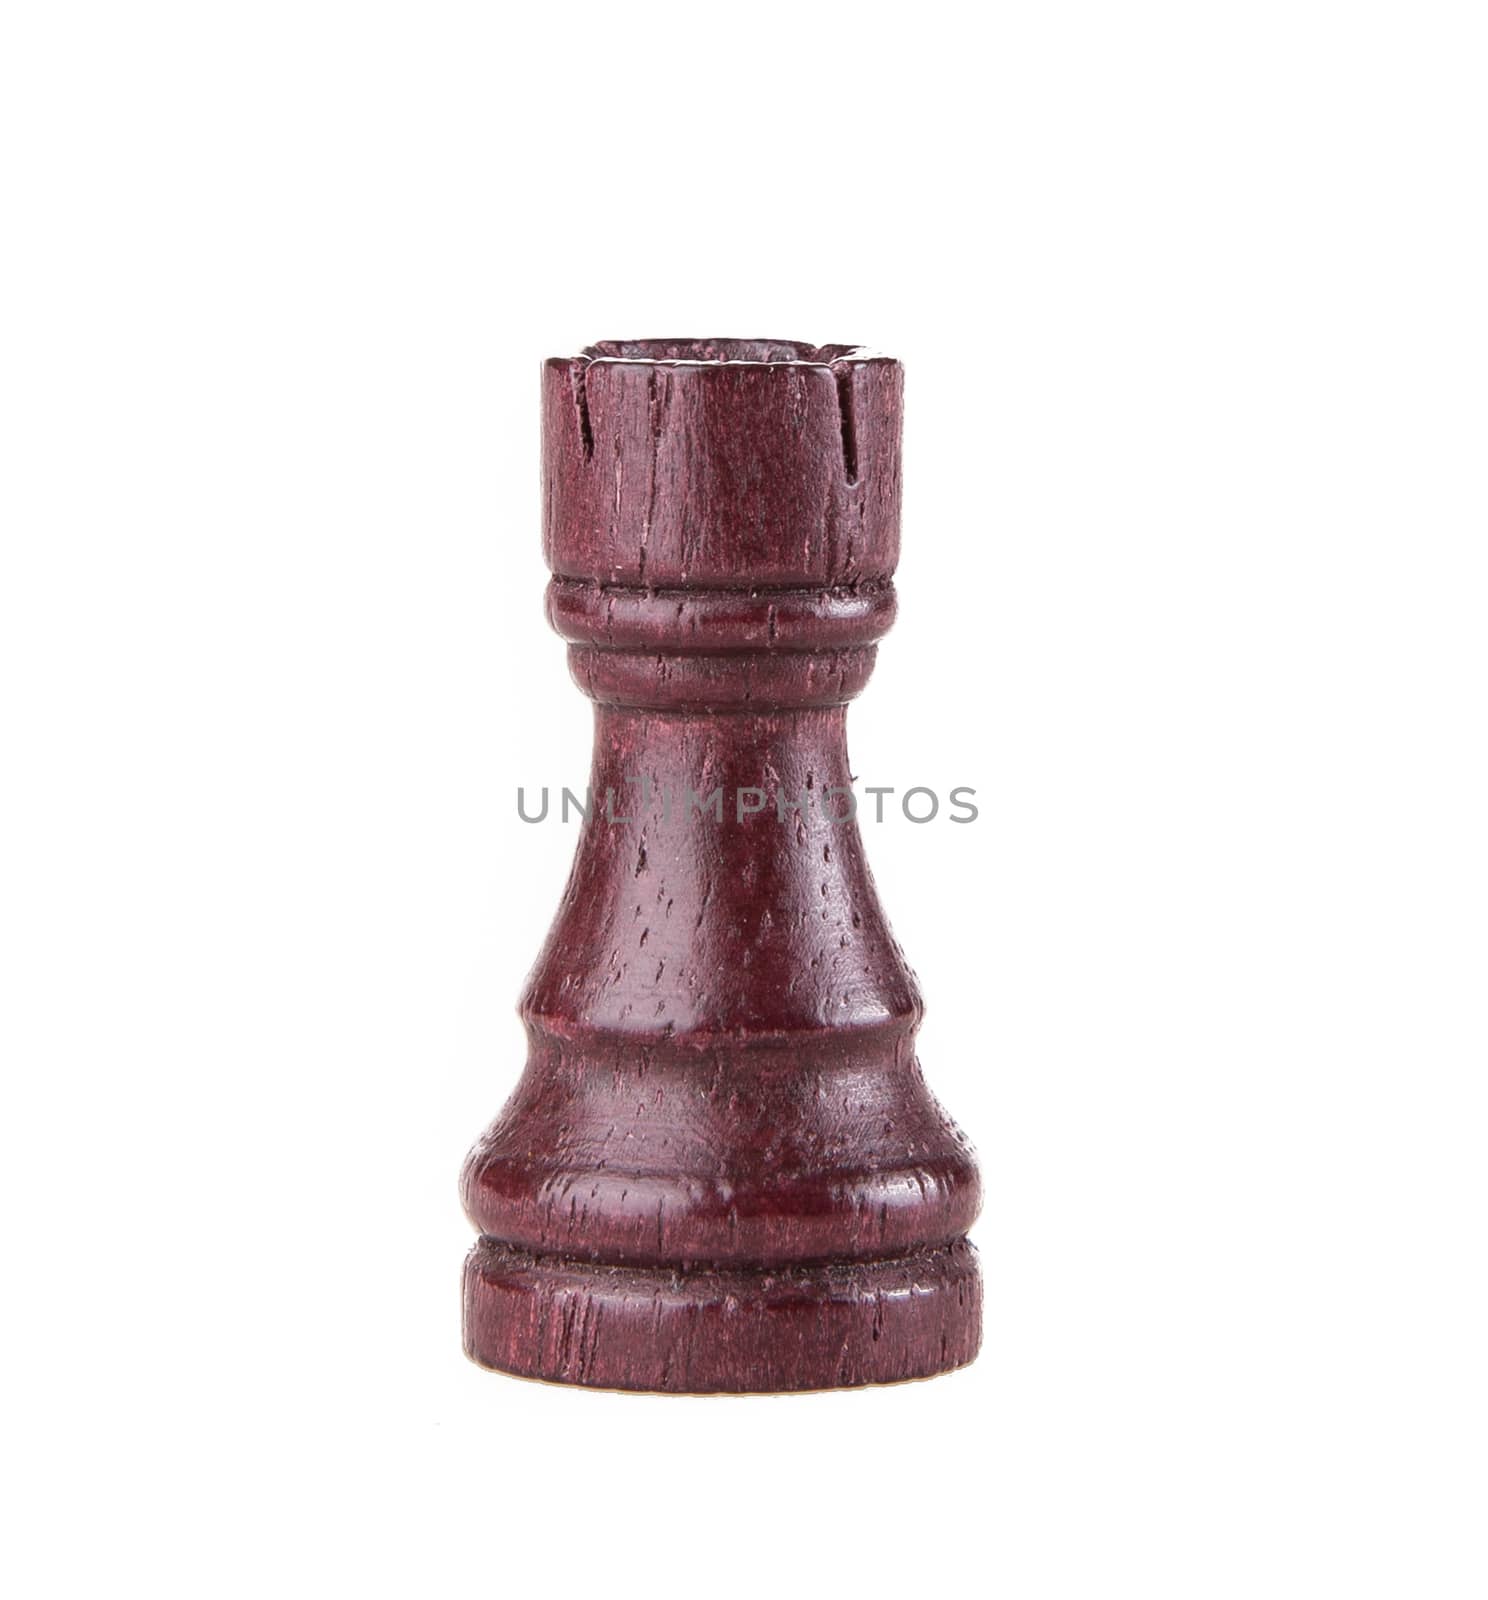 Wooden chess pieces by tehcheesiong